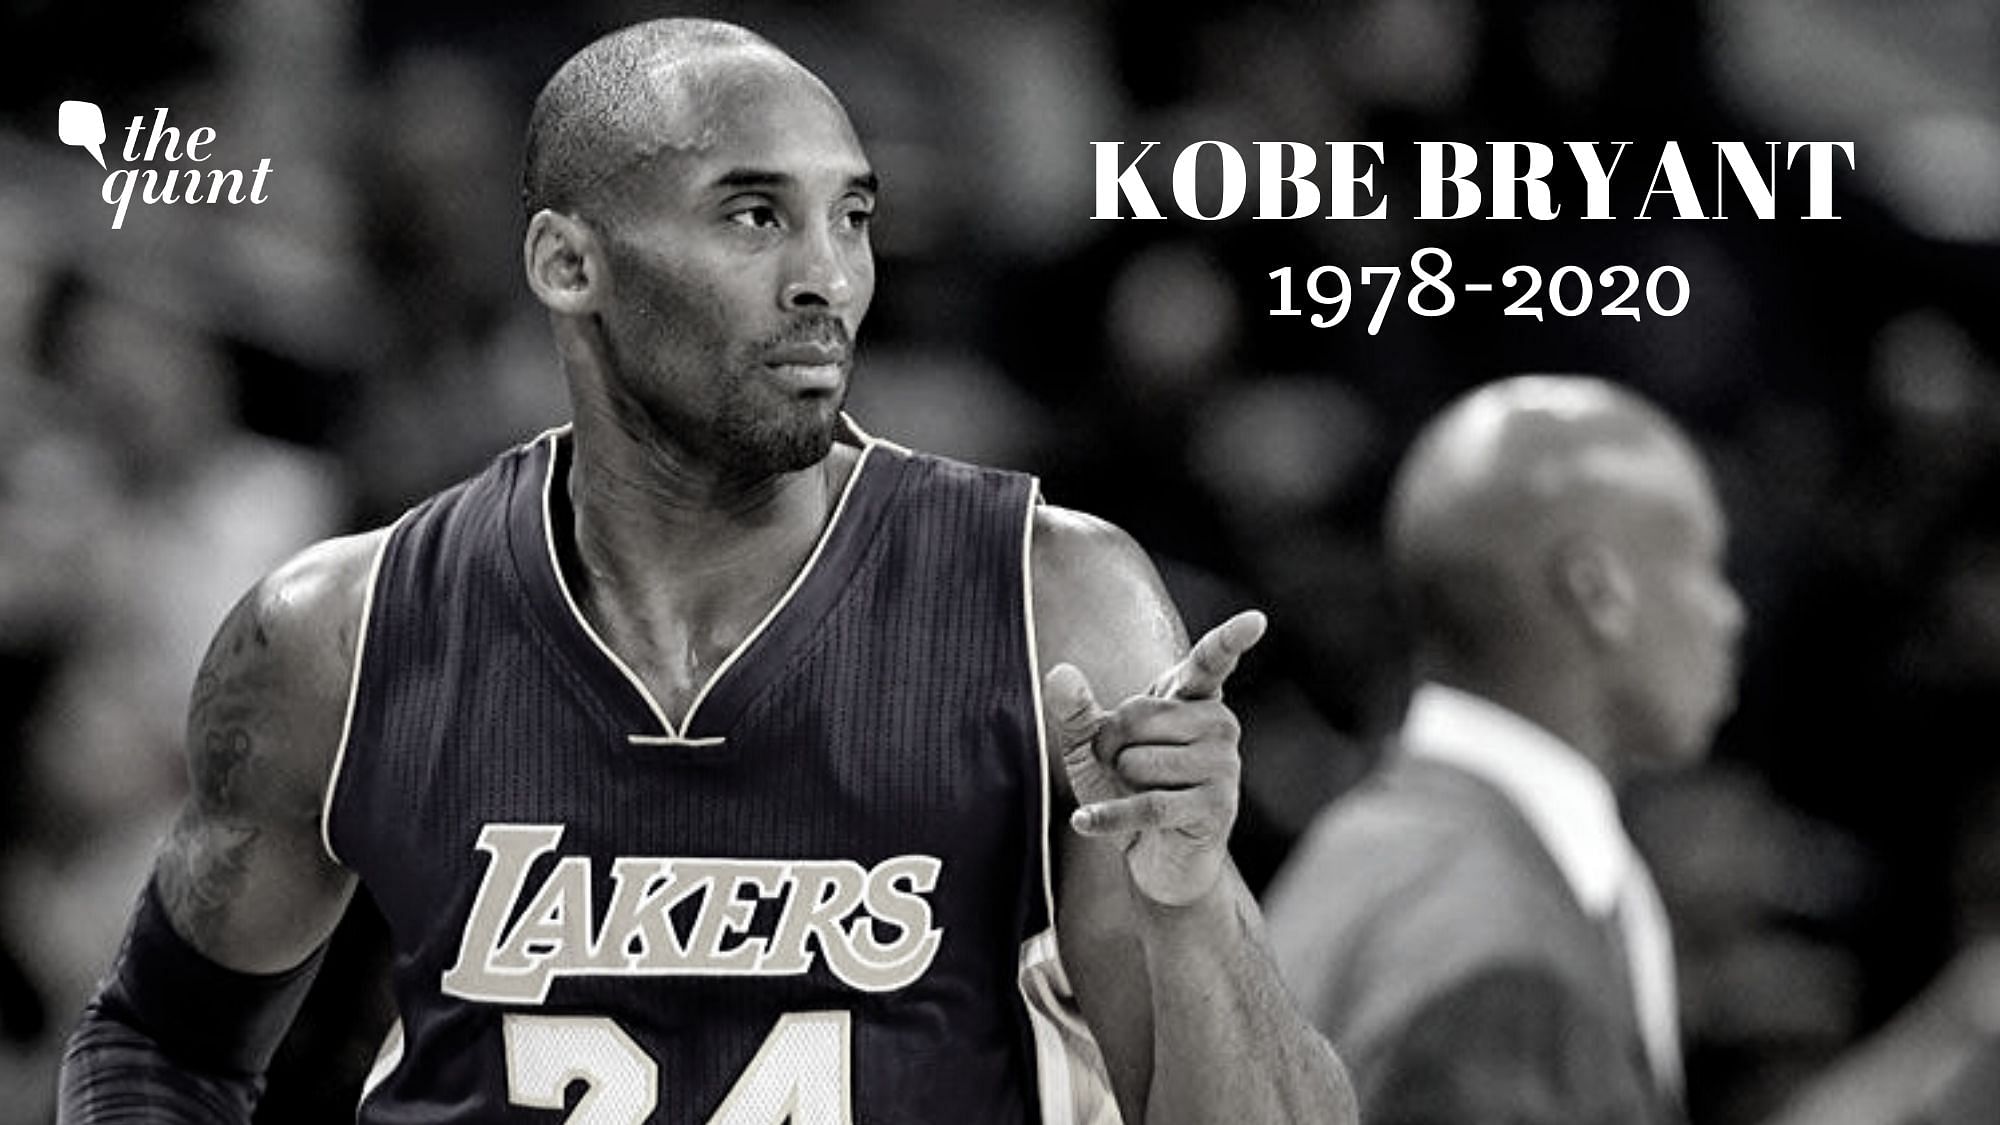 Tributes started pouring in for basketball icon Kobe Bryant, who was 41-year-old during the time of his death.